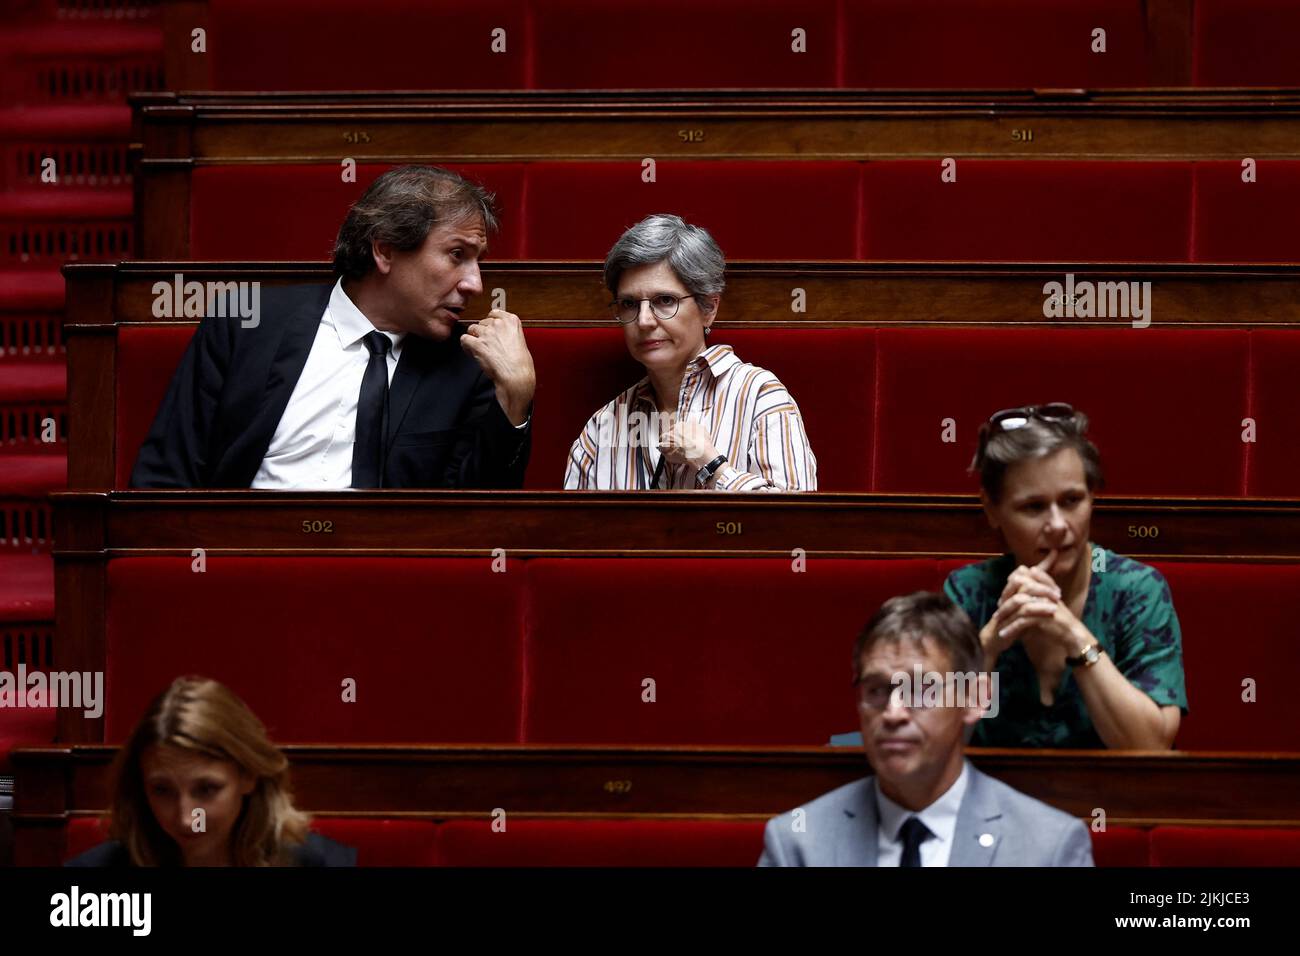 Members of parliament Jerome Guedj of Parti Socialiste (PS) and Sandrine Rousseau of the EELV ecologist party and the left-wing coalition NUPES attend the questions to the government session at the National Assembly in Paris, France, August 2, 2022. REUTERS/Benoit Tessier Stock Photo